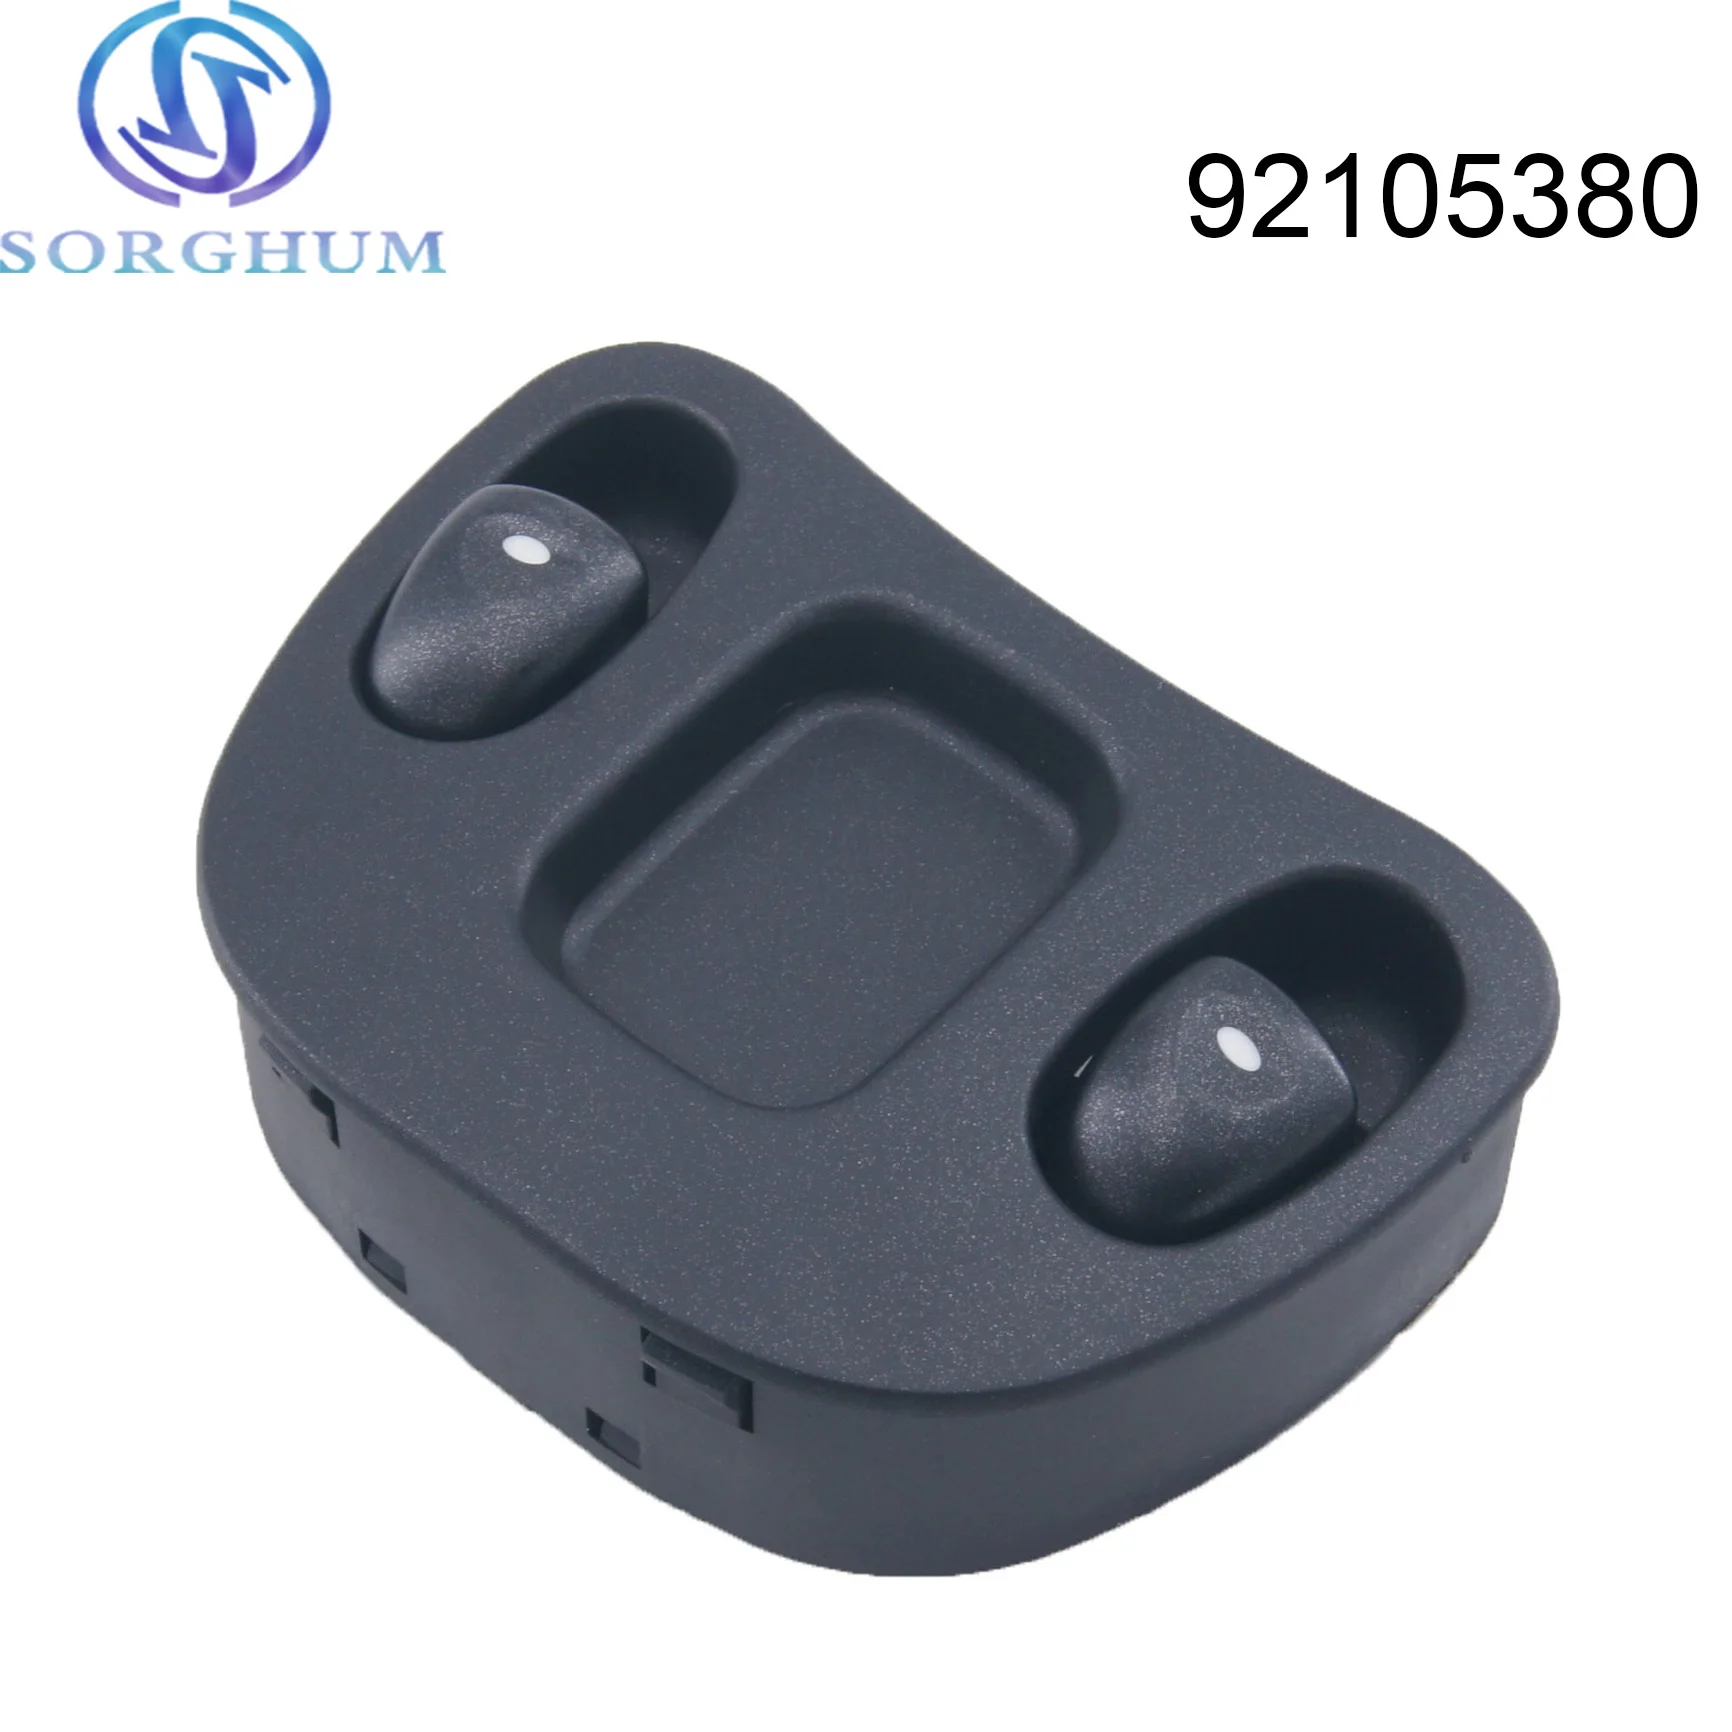 

Sorghum 92105380 Electric Power Window Lifter Control Switch Push Button For Ford Holden Commodore Vu Vx Ss Ute 2 Console